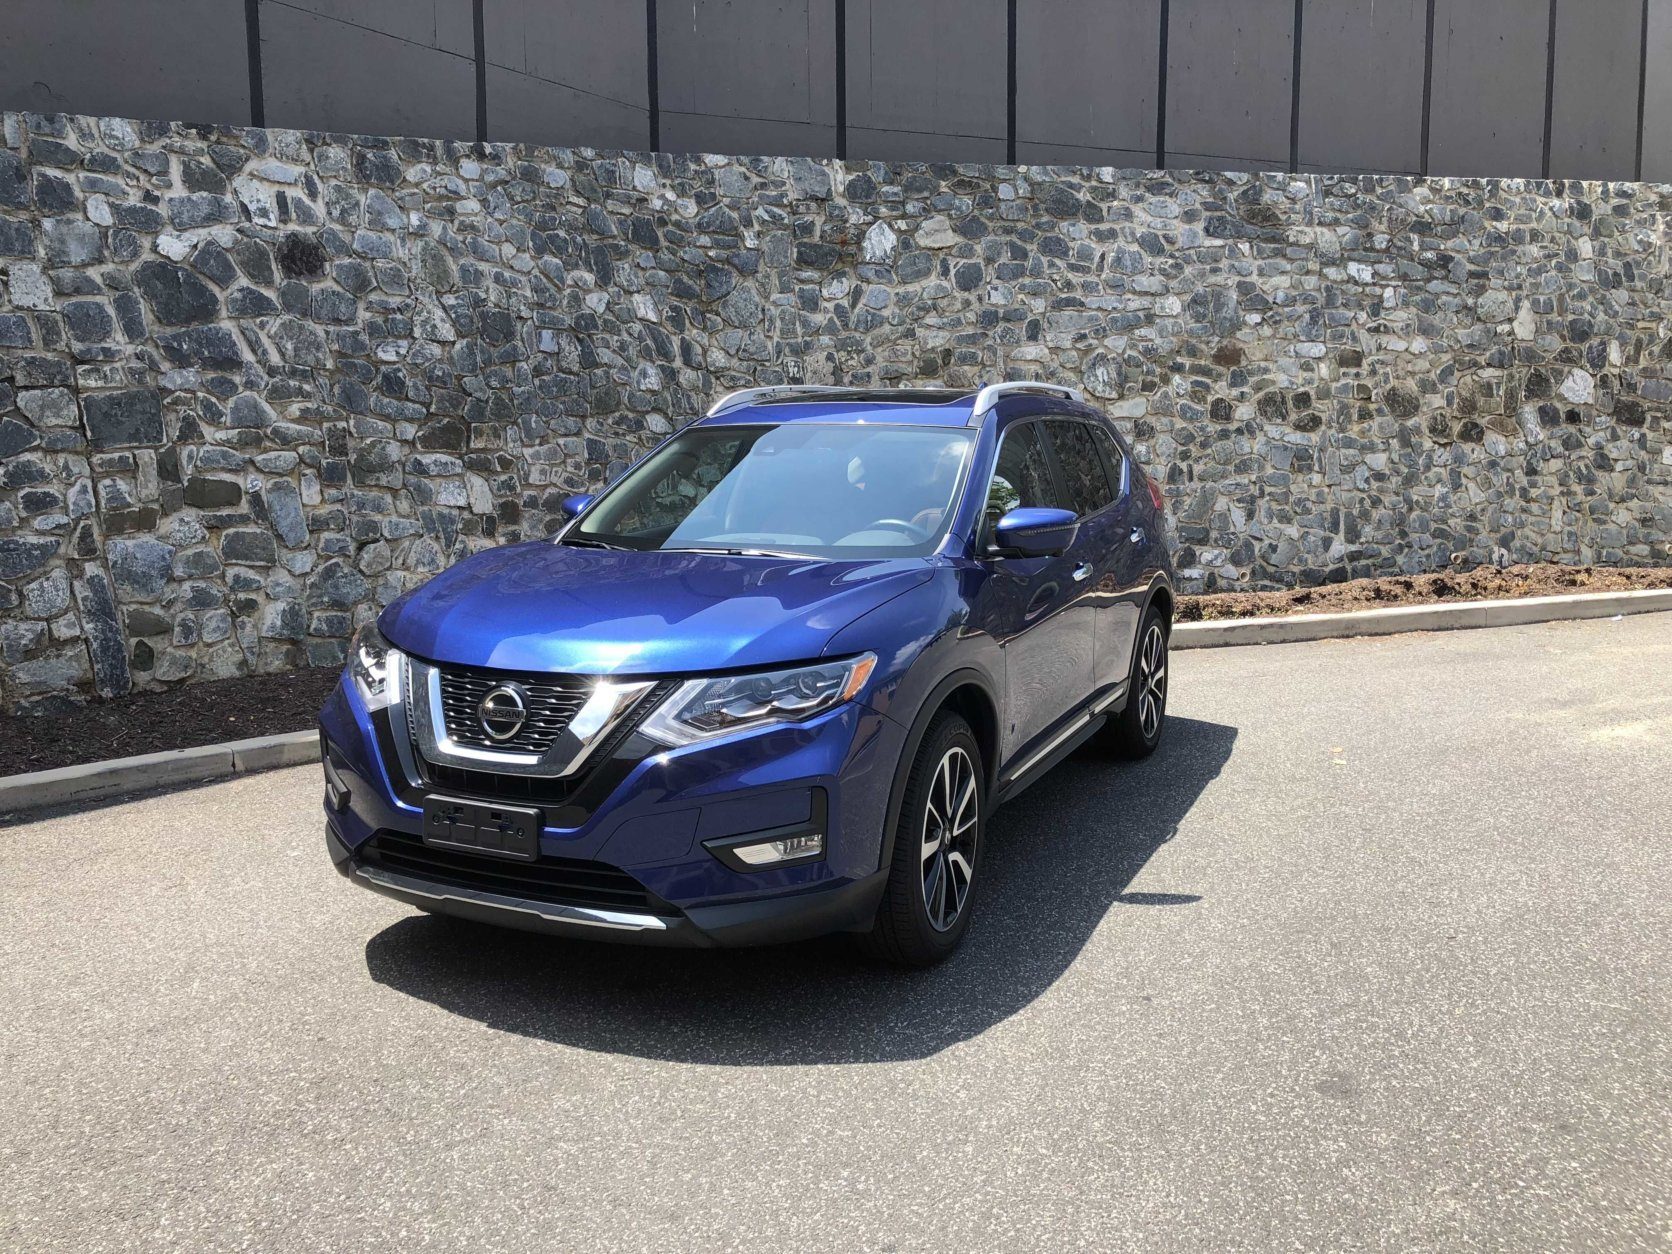 The 2019 Nissan Rogue stands out through its integration of tech in the popular crossover. (WTOP/Mike Parris)